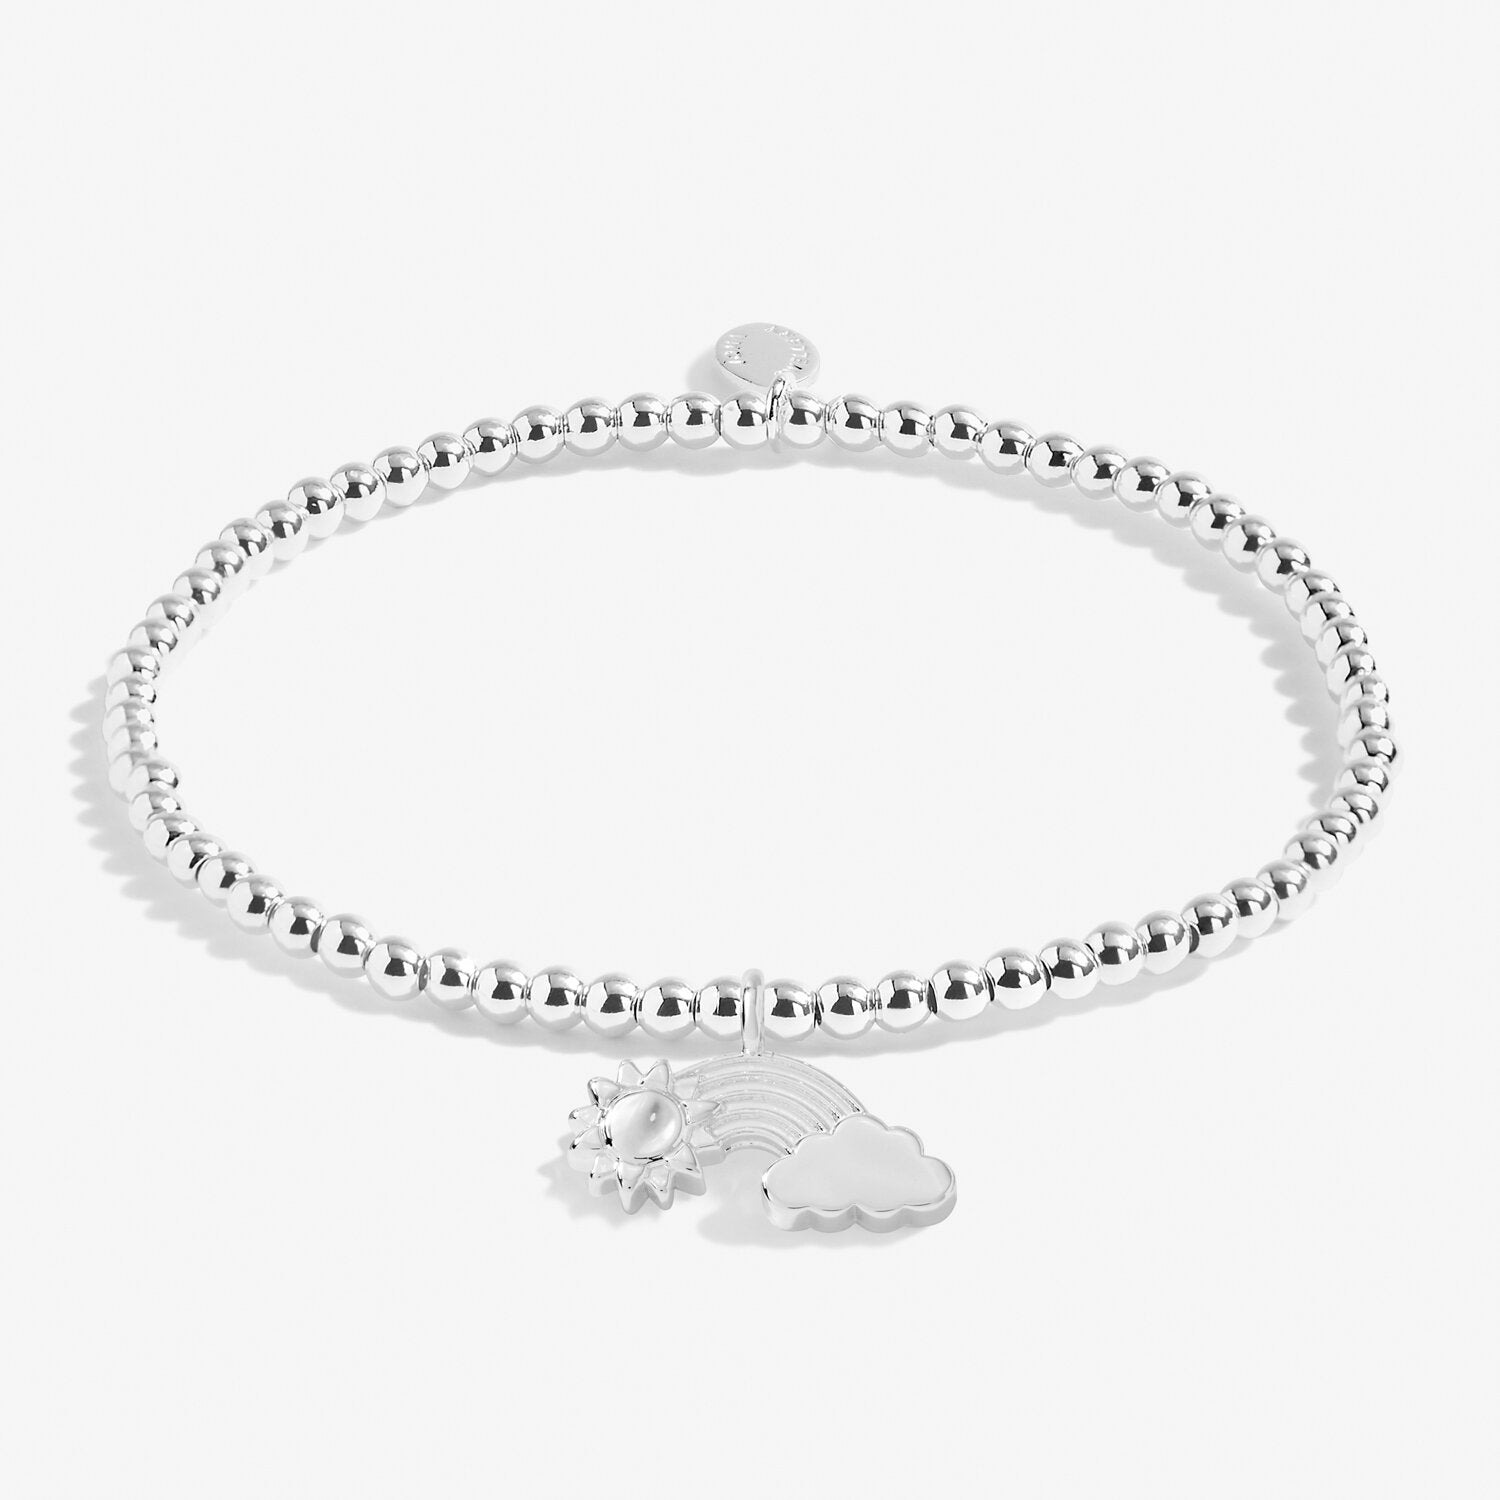 A Little - Whatever The Weather We'll Get Through It Together Bracelet - Joma jewellery